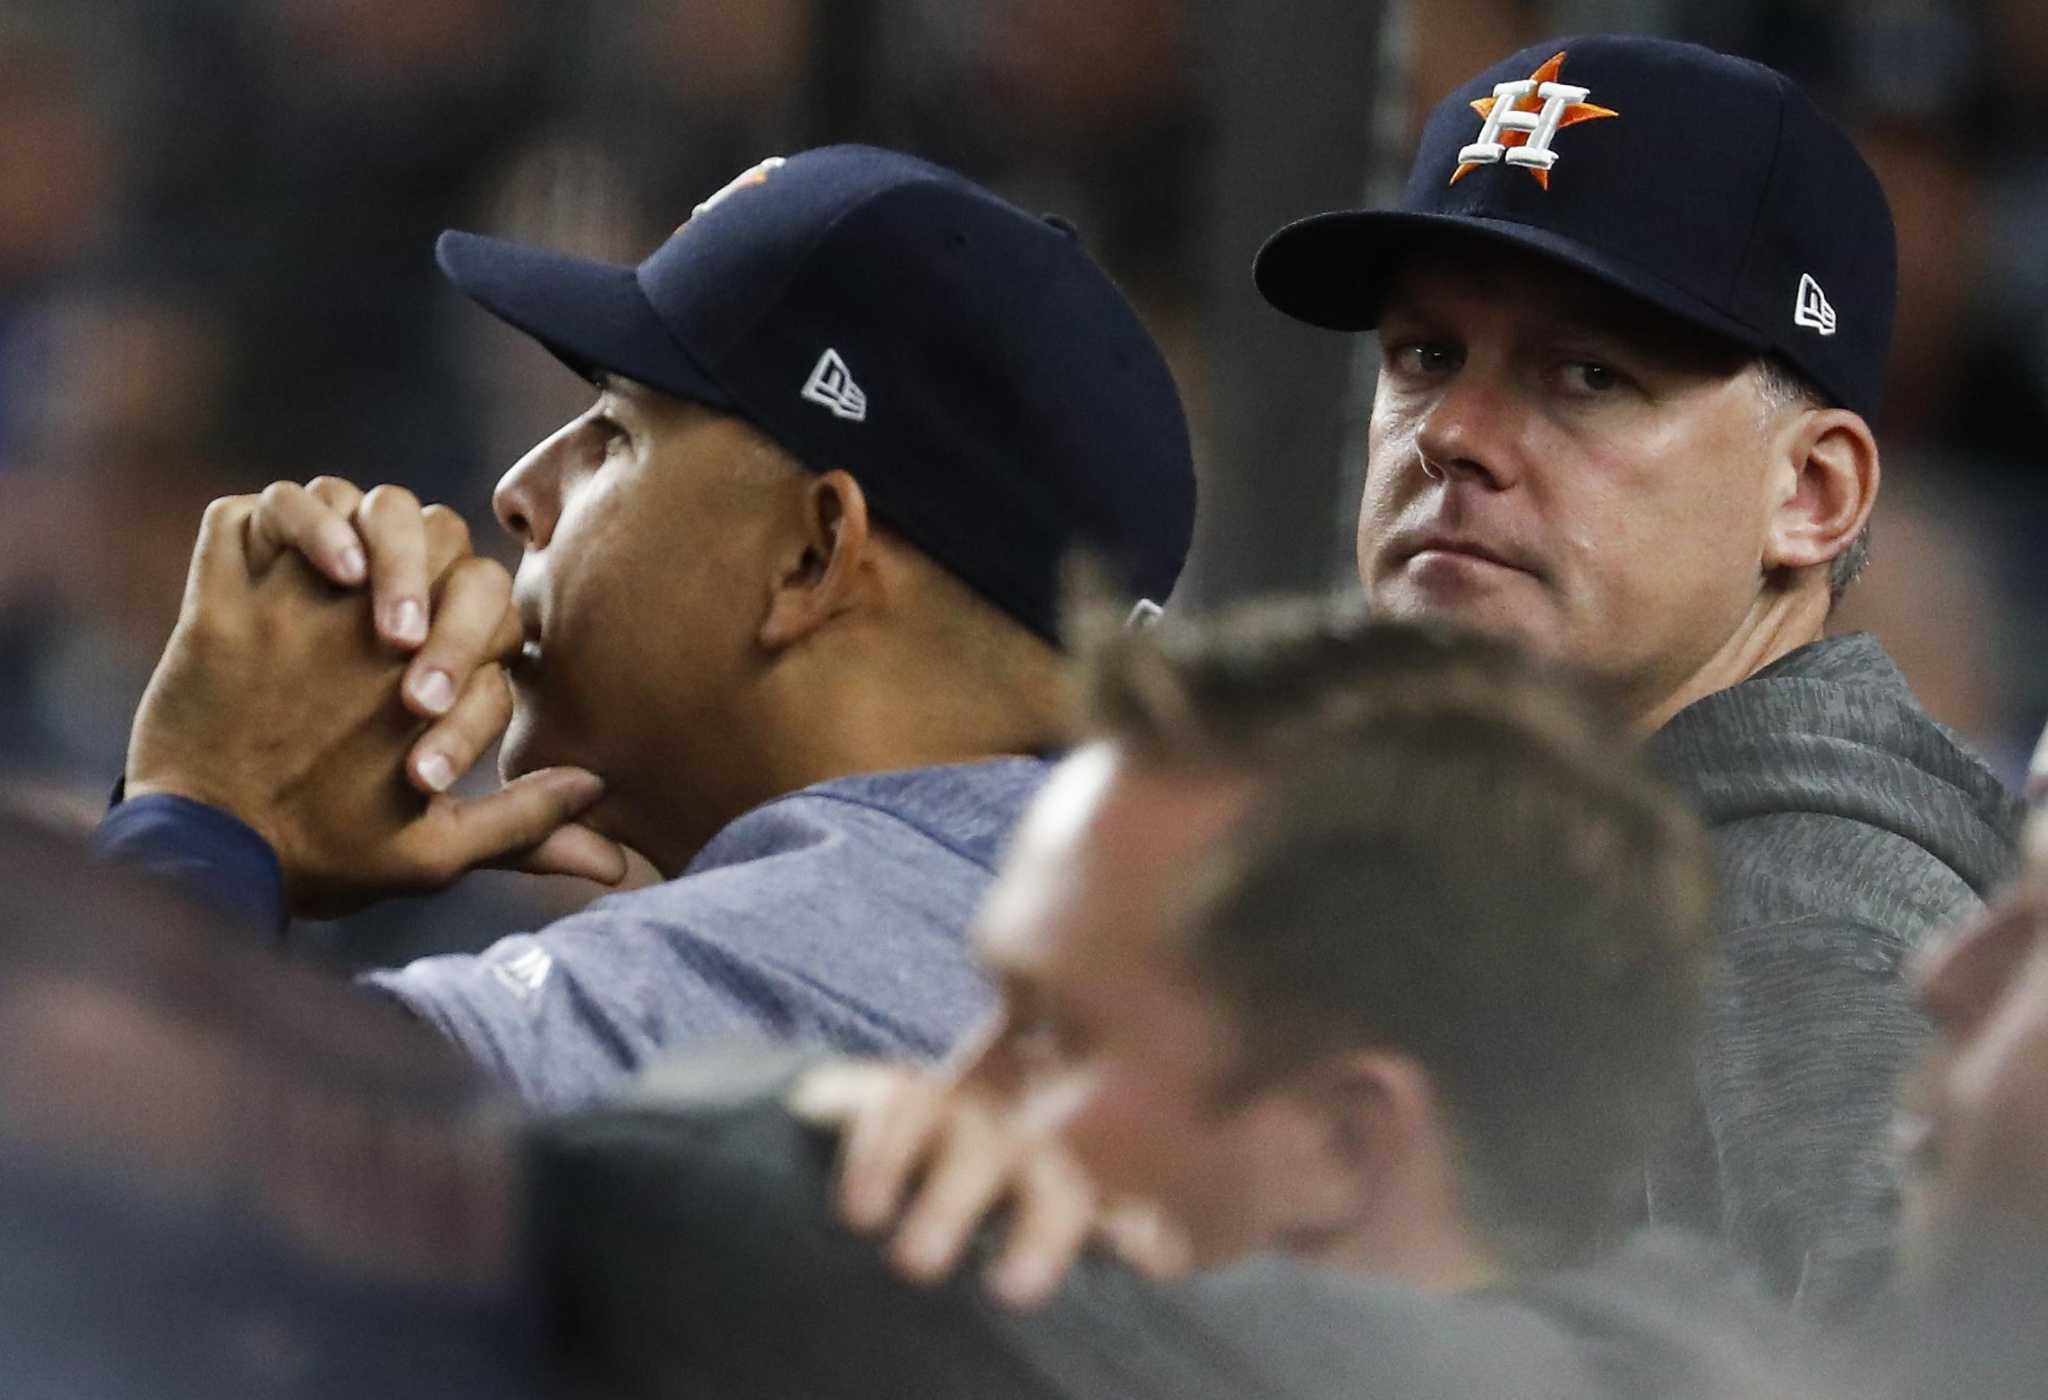 Detroit Tigers don't hit Houston Astros, but crowd boos loudly